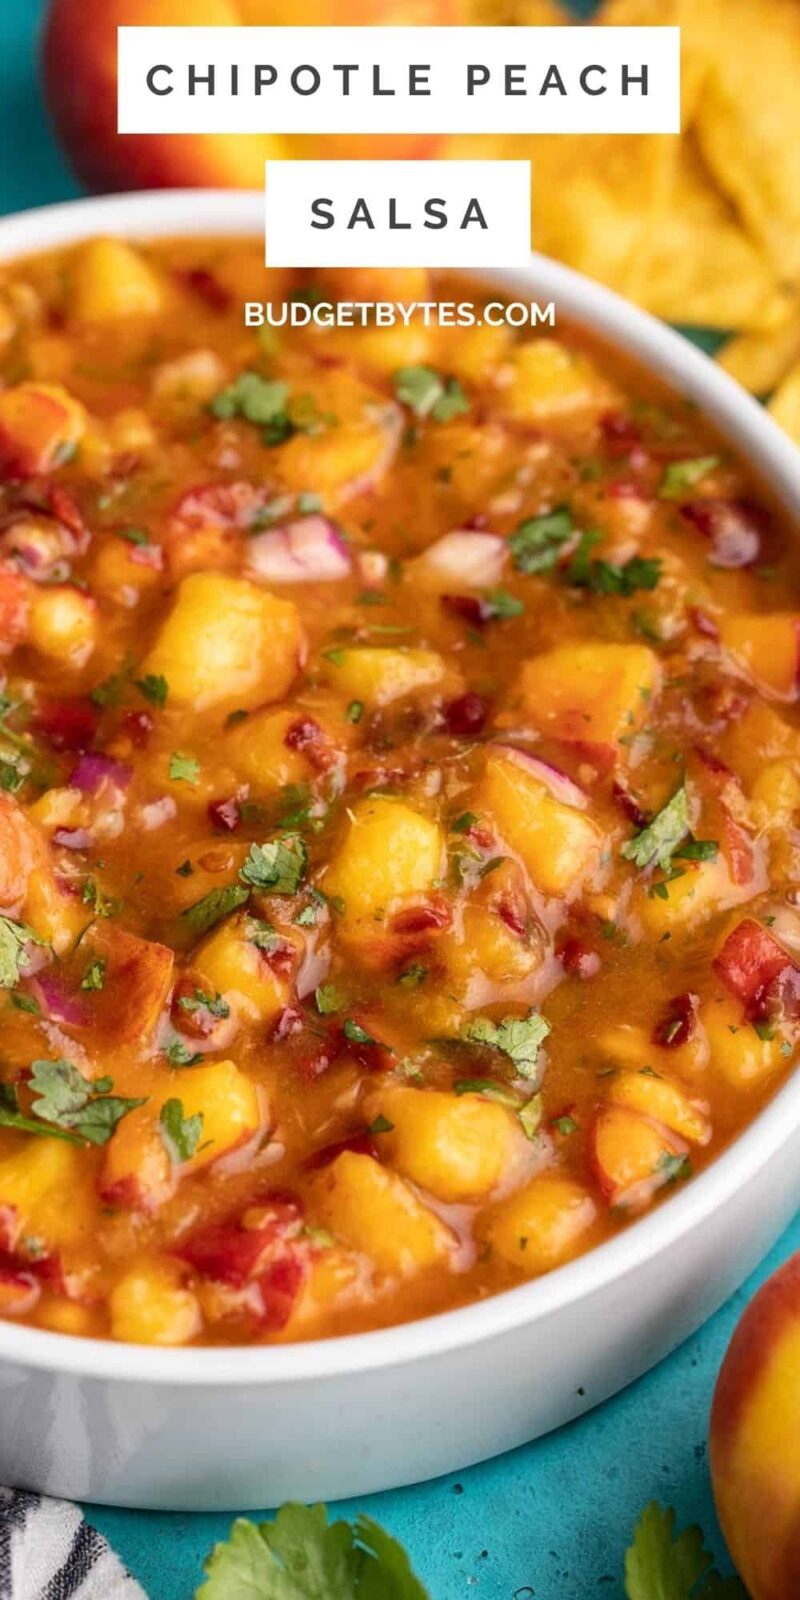 Side view of a bowl of chipotle peach salsa.